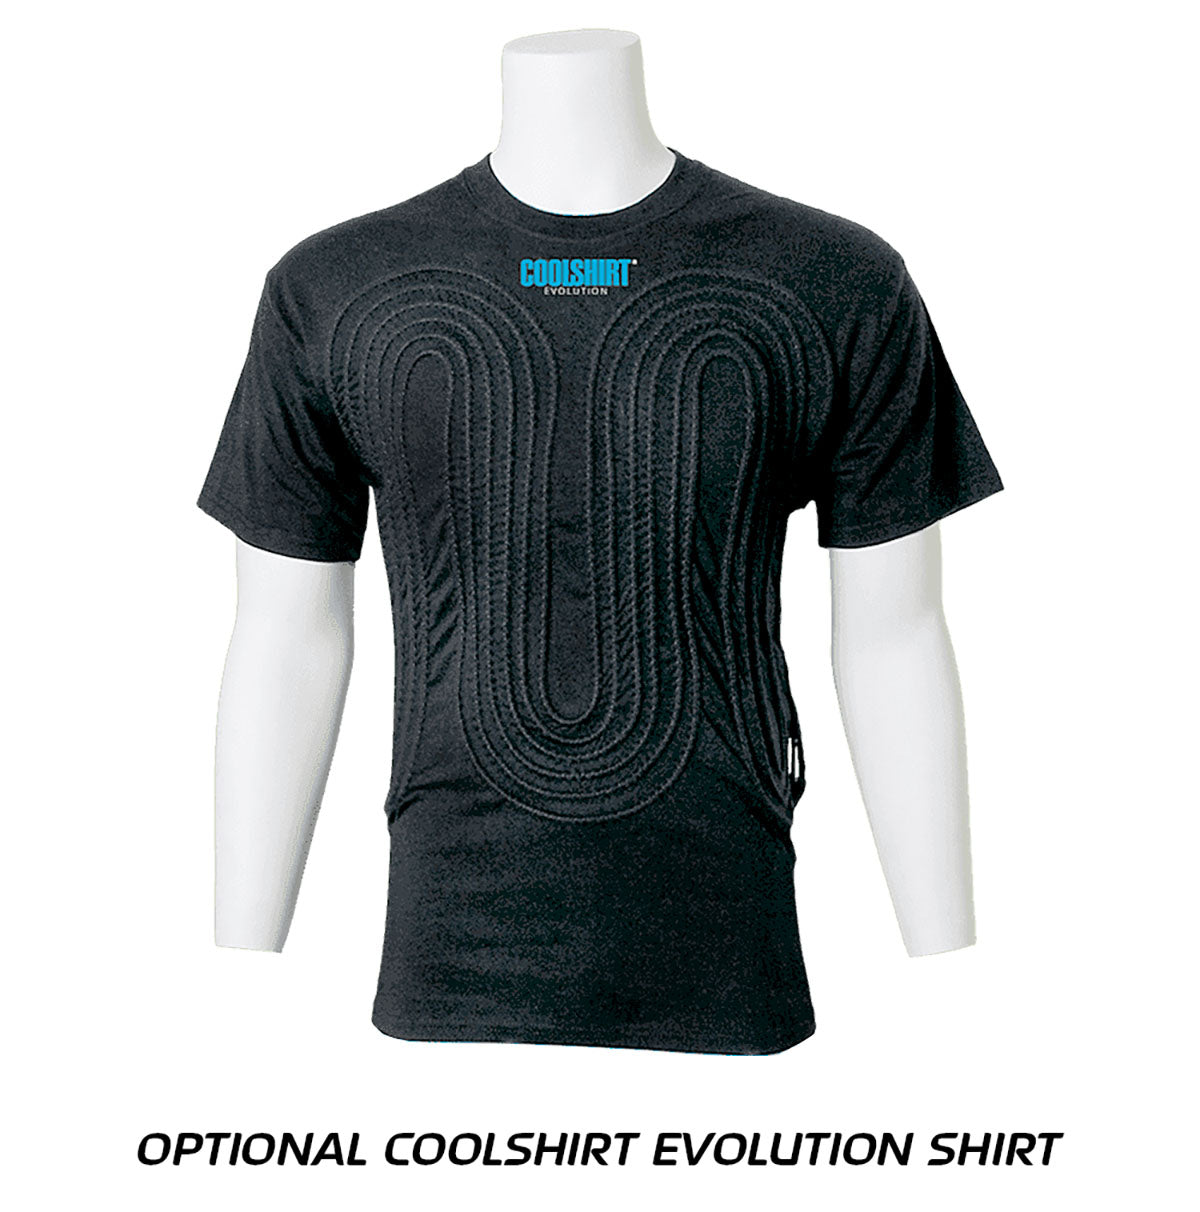 Coolshirt Complete Club System All-In-One Kit